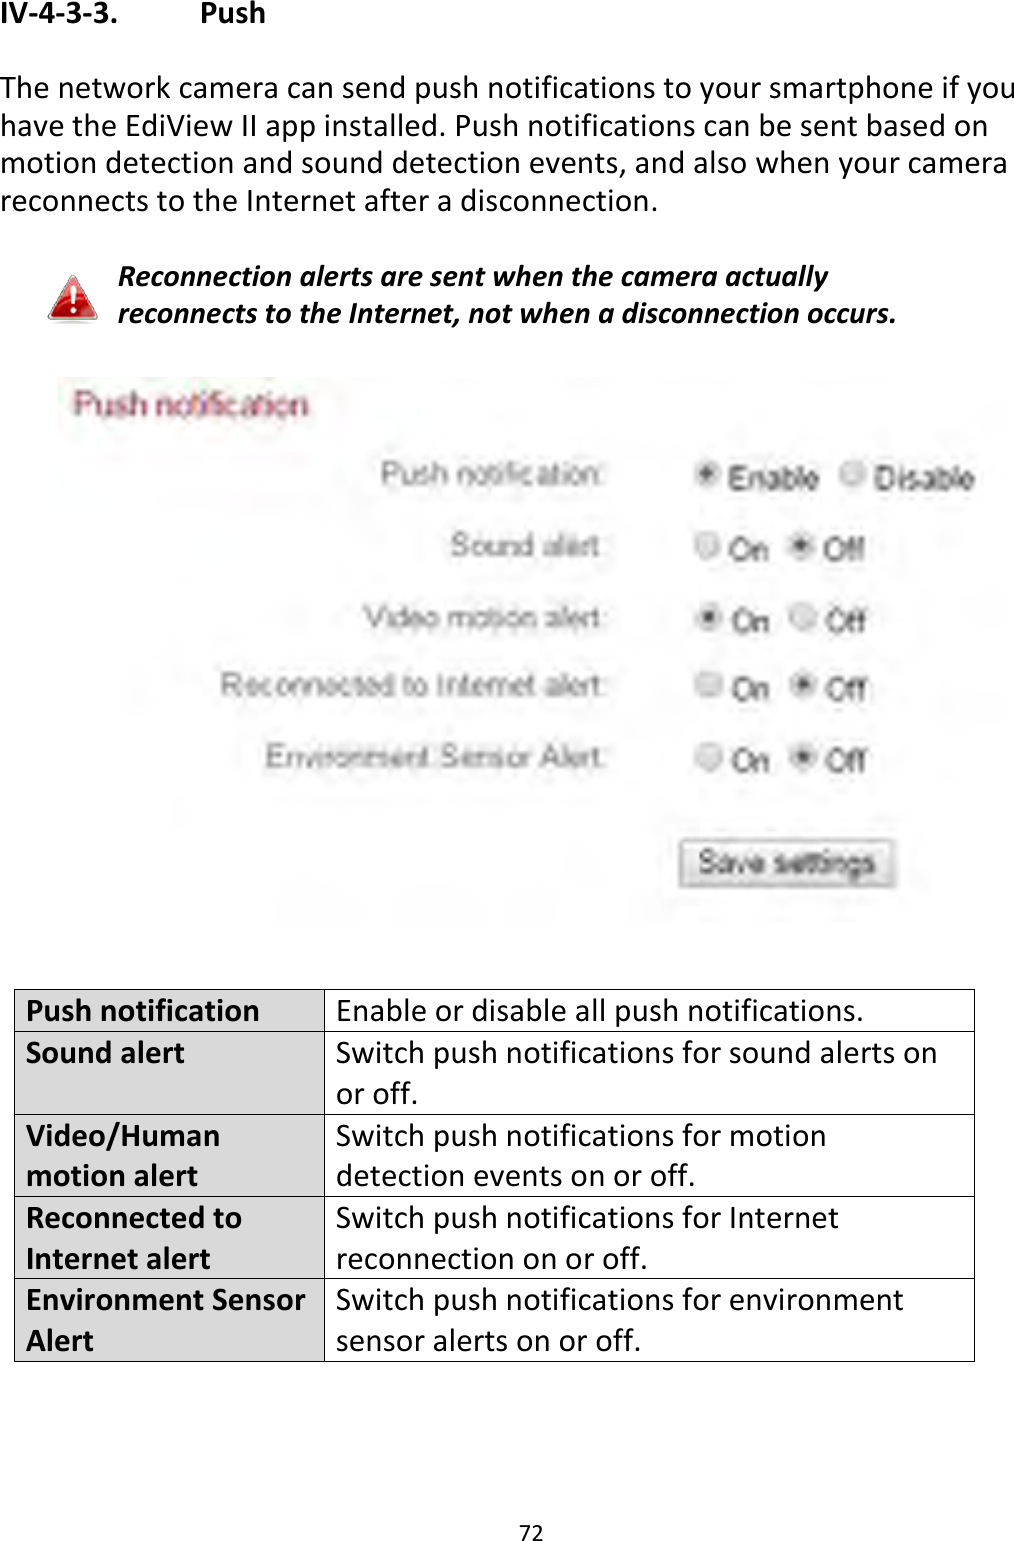 72  IV-4-3-3.    Push  The network camera can send push notifications to your smartphone if you have the EdiView II app installed. Push notifications can be sent based on motion detection and sound detection events, and also when your camera reconnects to the Internet after a disconnection.  Reconnection alerts are sent when the camera actually reconnects to the Internet, not when a disconnection occurs.     Push notification Enable or disable all push notifications. Sound alert Switch push notifications for sound alerts on or off. Video/Human motion alert Switch push notifications for motion detection events on or off. Reconnected to Internet alert Switch push notifications for Internet reconnection on or off. Environment Sensor Alert Switch push notifications for environment sensor alerts on or off.   